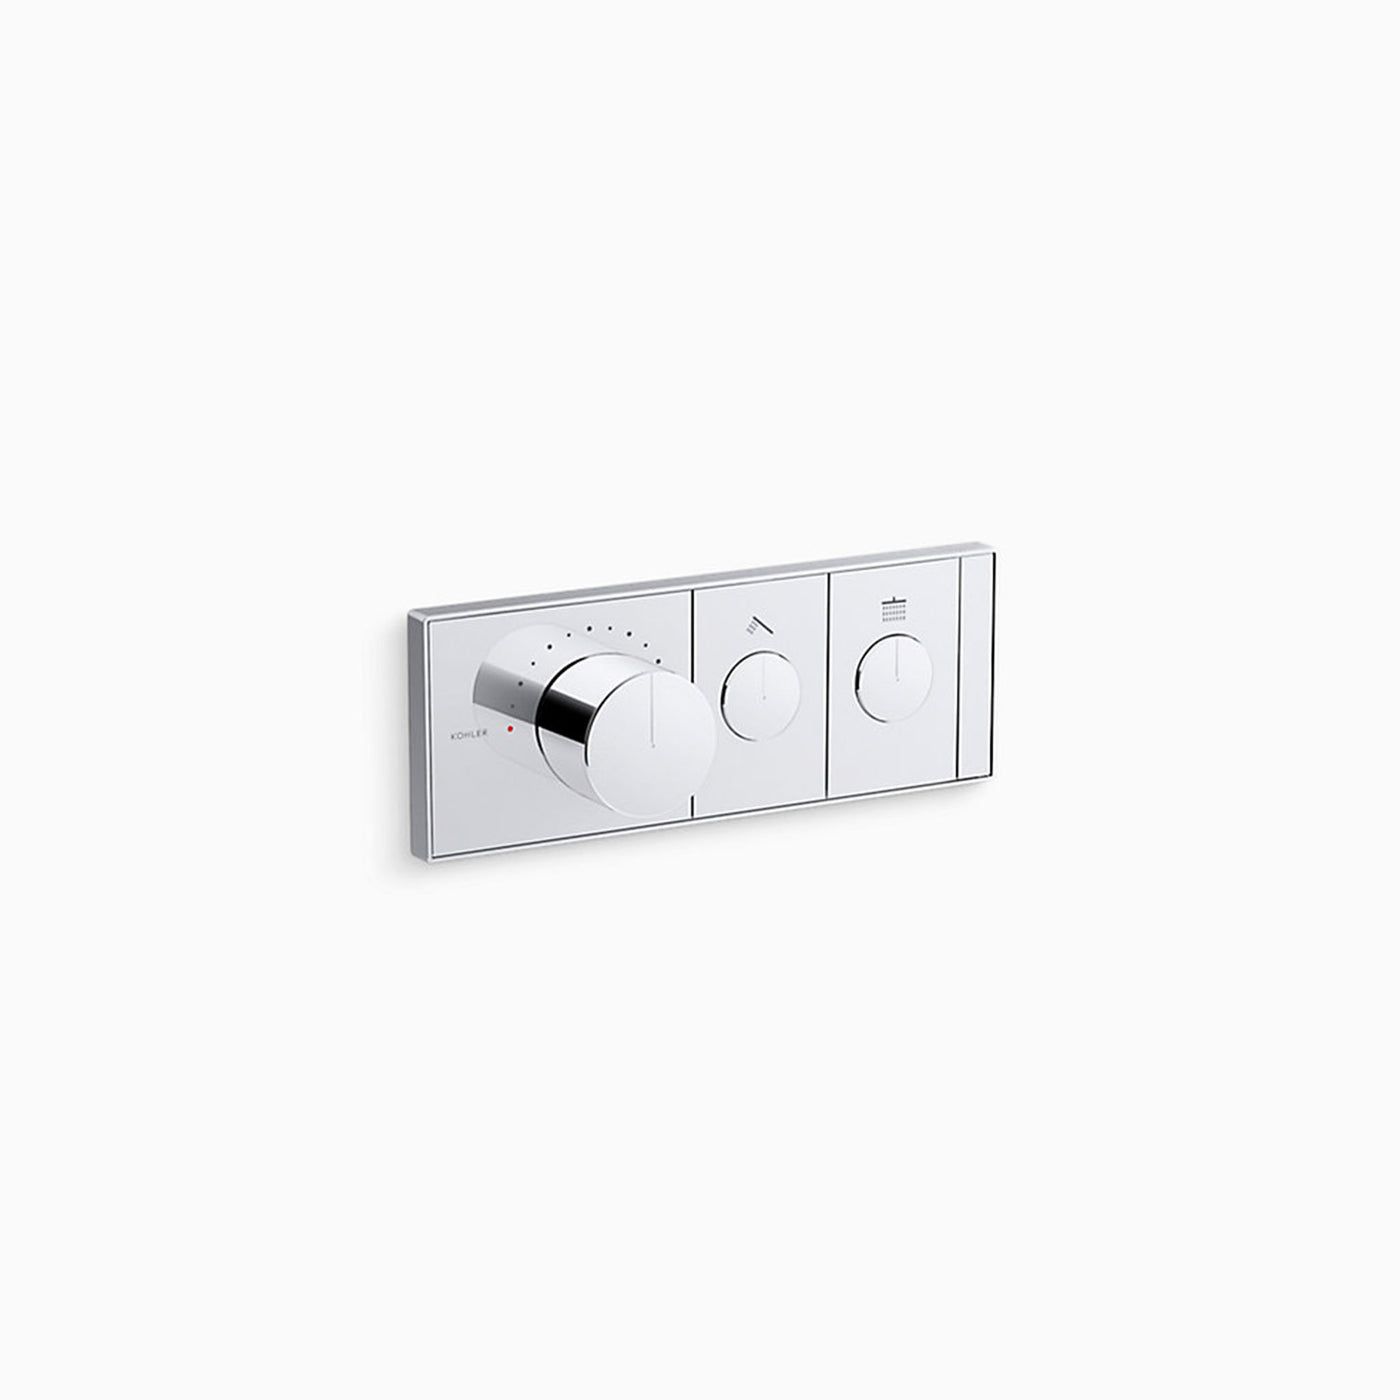 Anthem™ Two-outlet thermostatic valve control panel with recessed push buttons